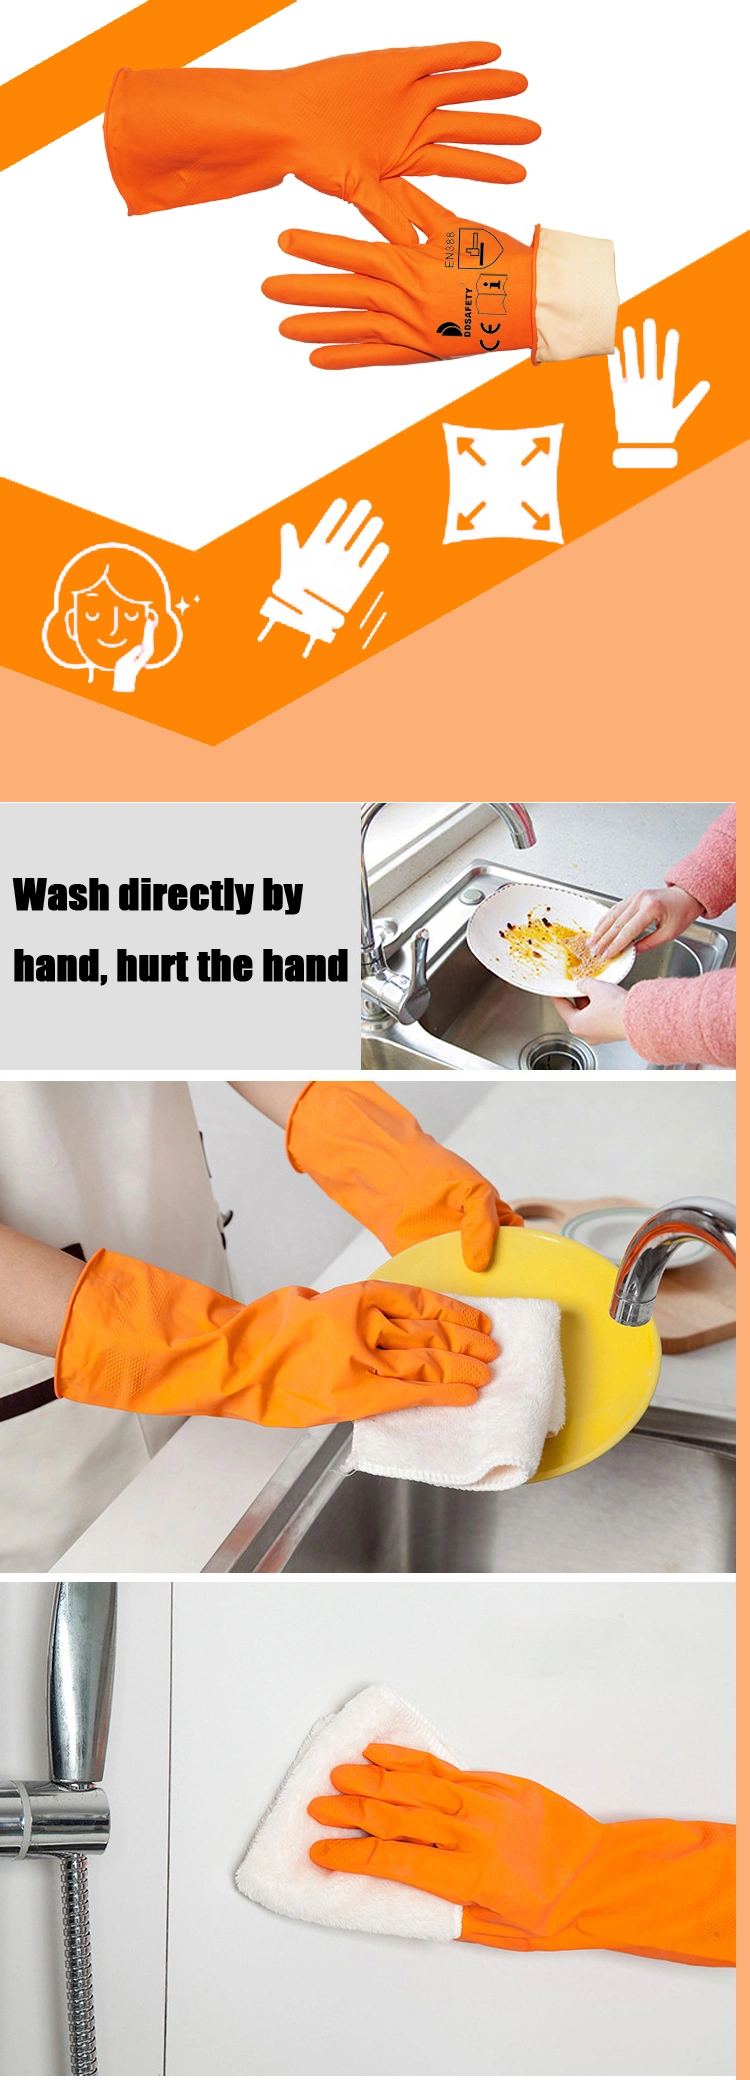 Orange Latex Household Cleaning with Long Cuff Working Labor Gloves